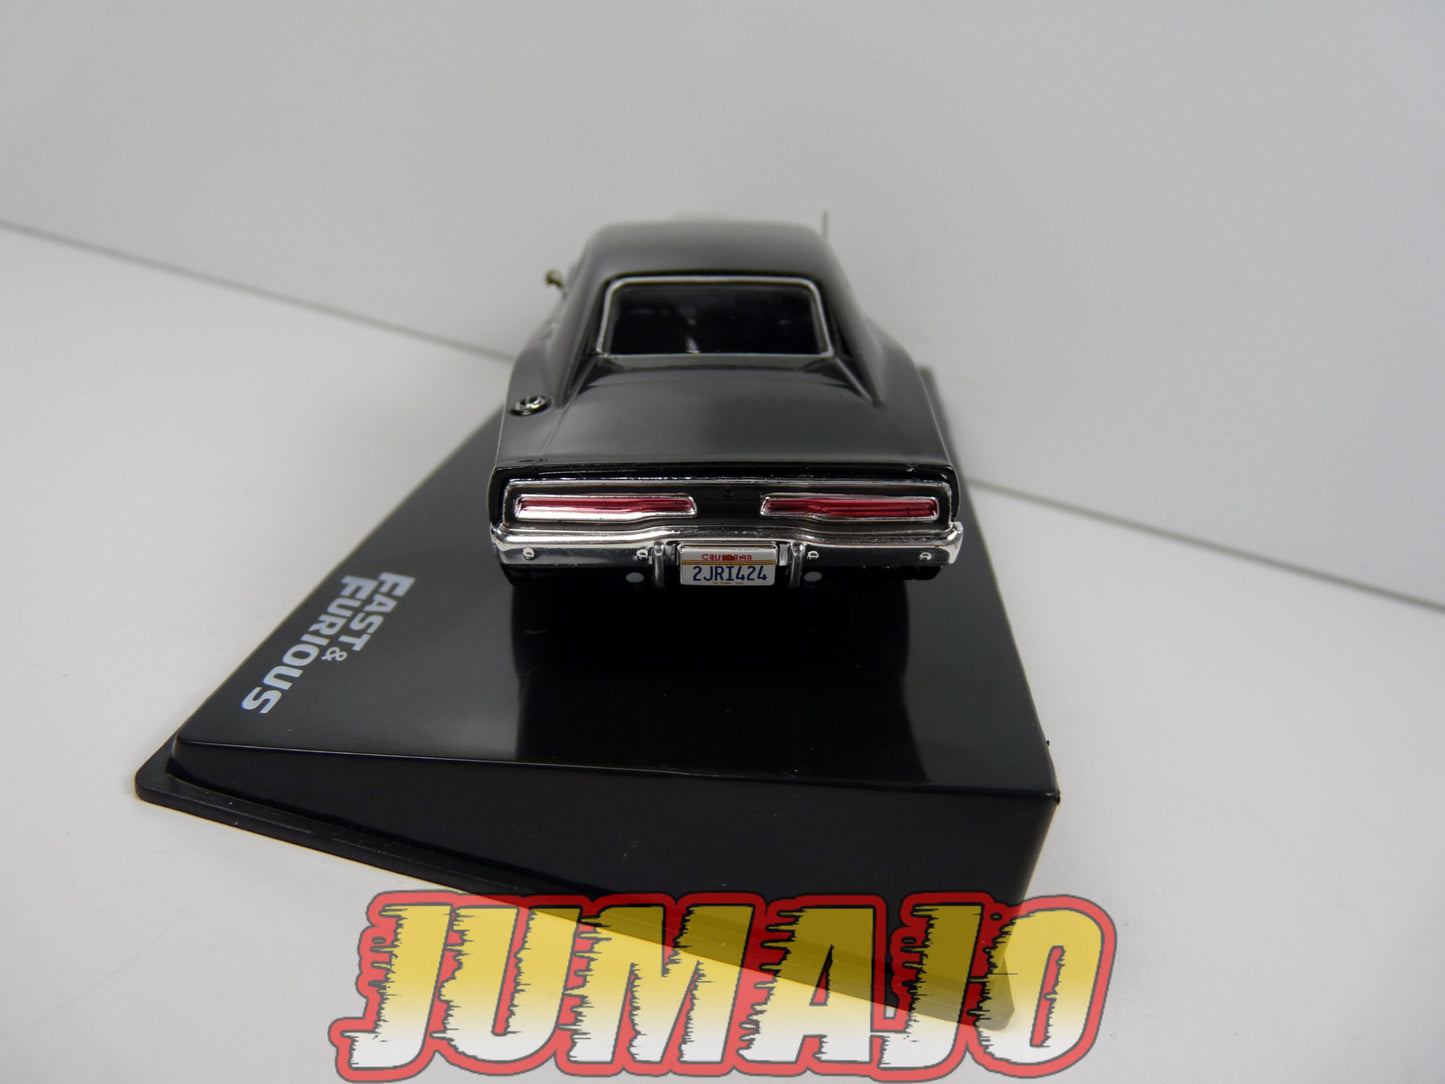 DIV29 Voiture 1/43 IXO altaya Fast and Furious Dodge Charger R/T